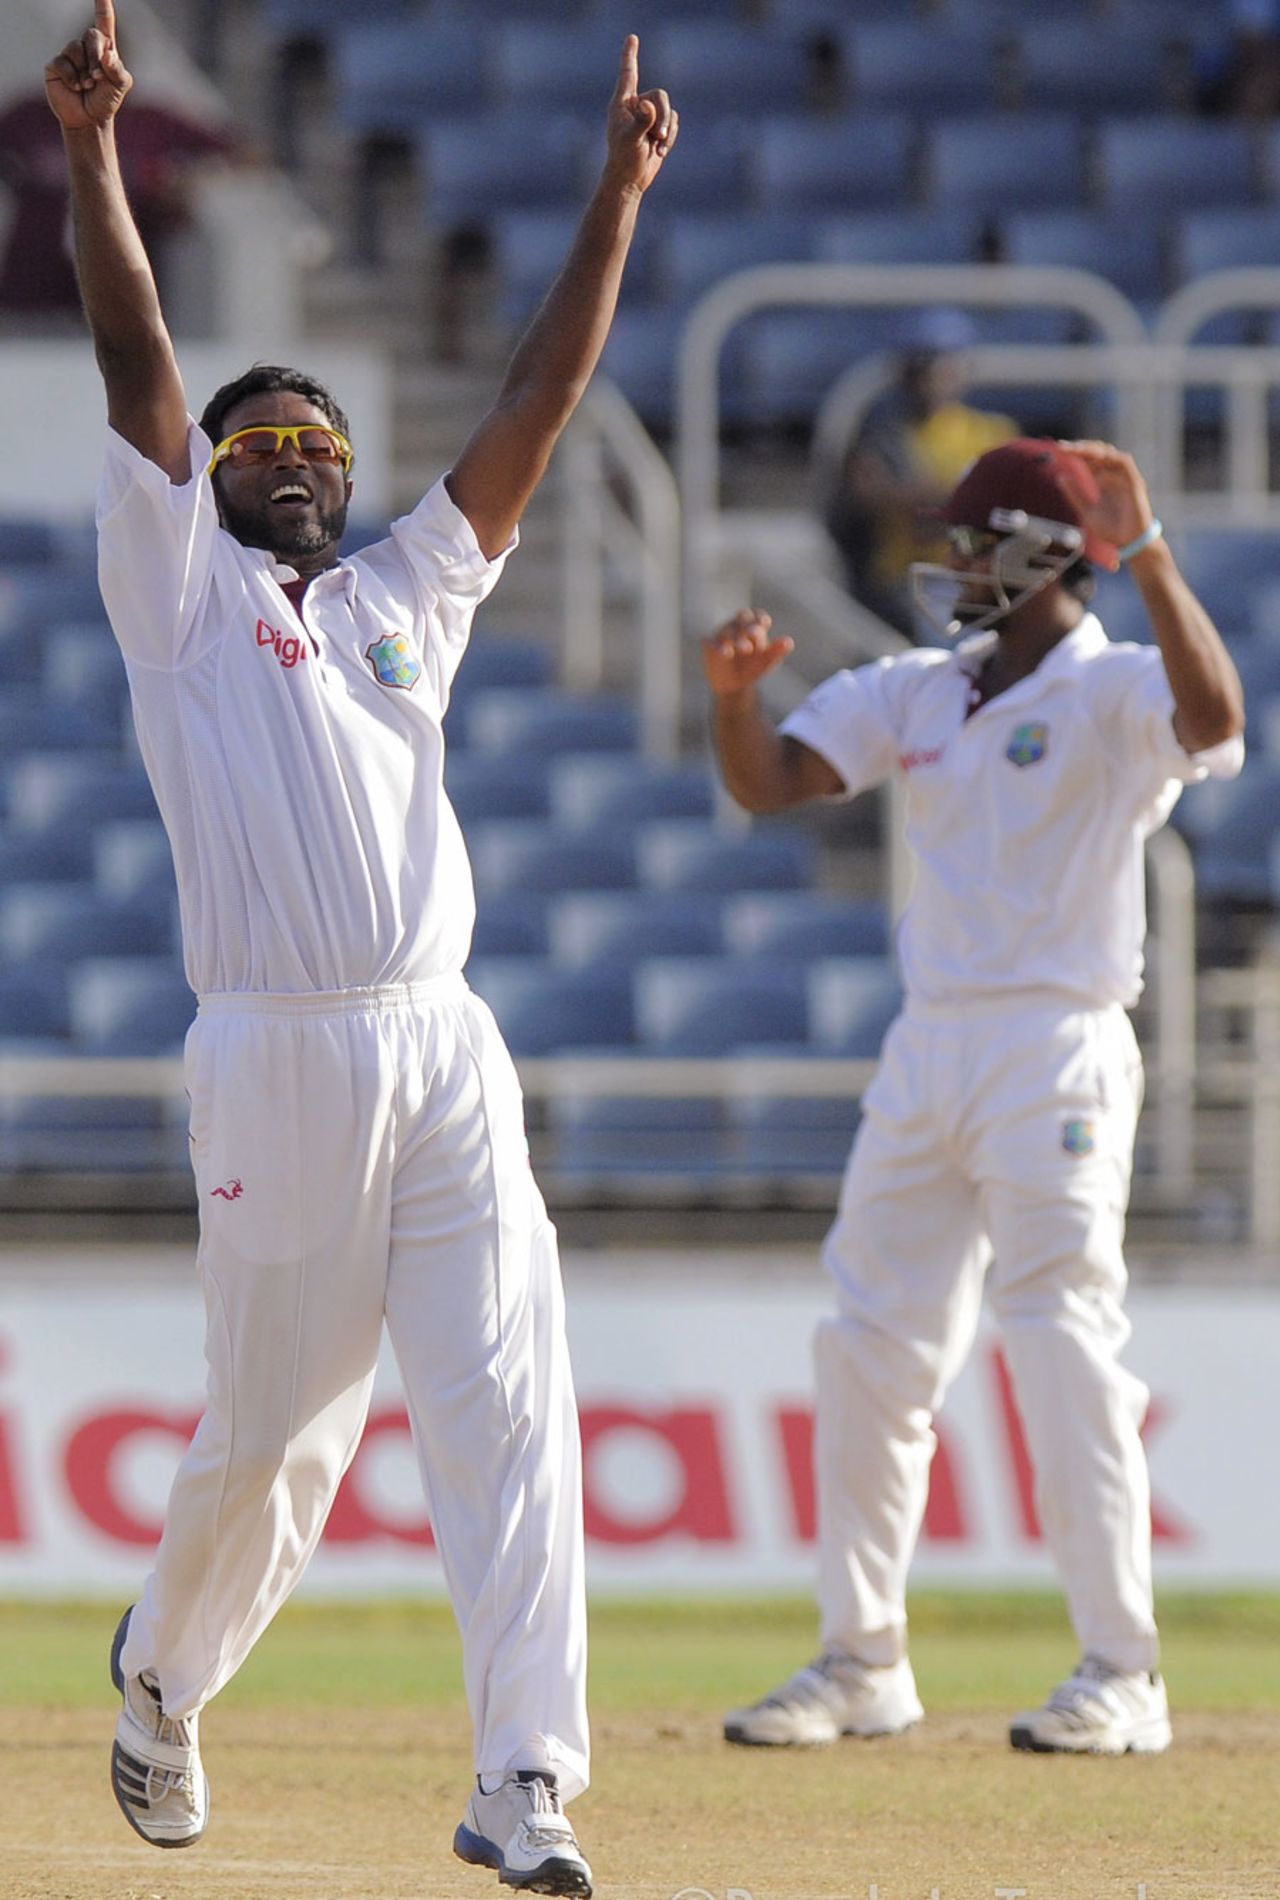 Narsingh Deonarine celebrates the wicket of BJ Watling, West Indies v New Zealand, 2nd Test, Jamaica, 2nd day, August 3, 2012